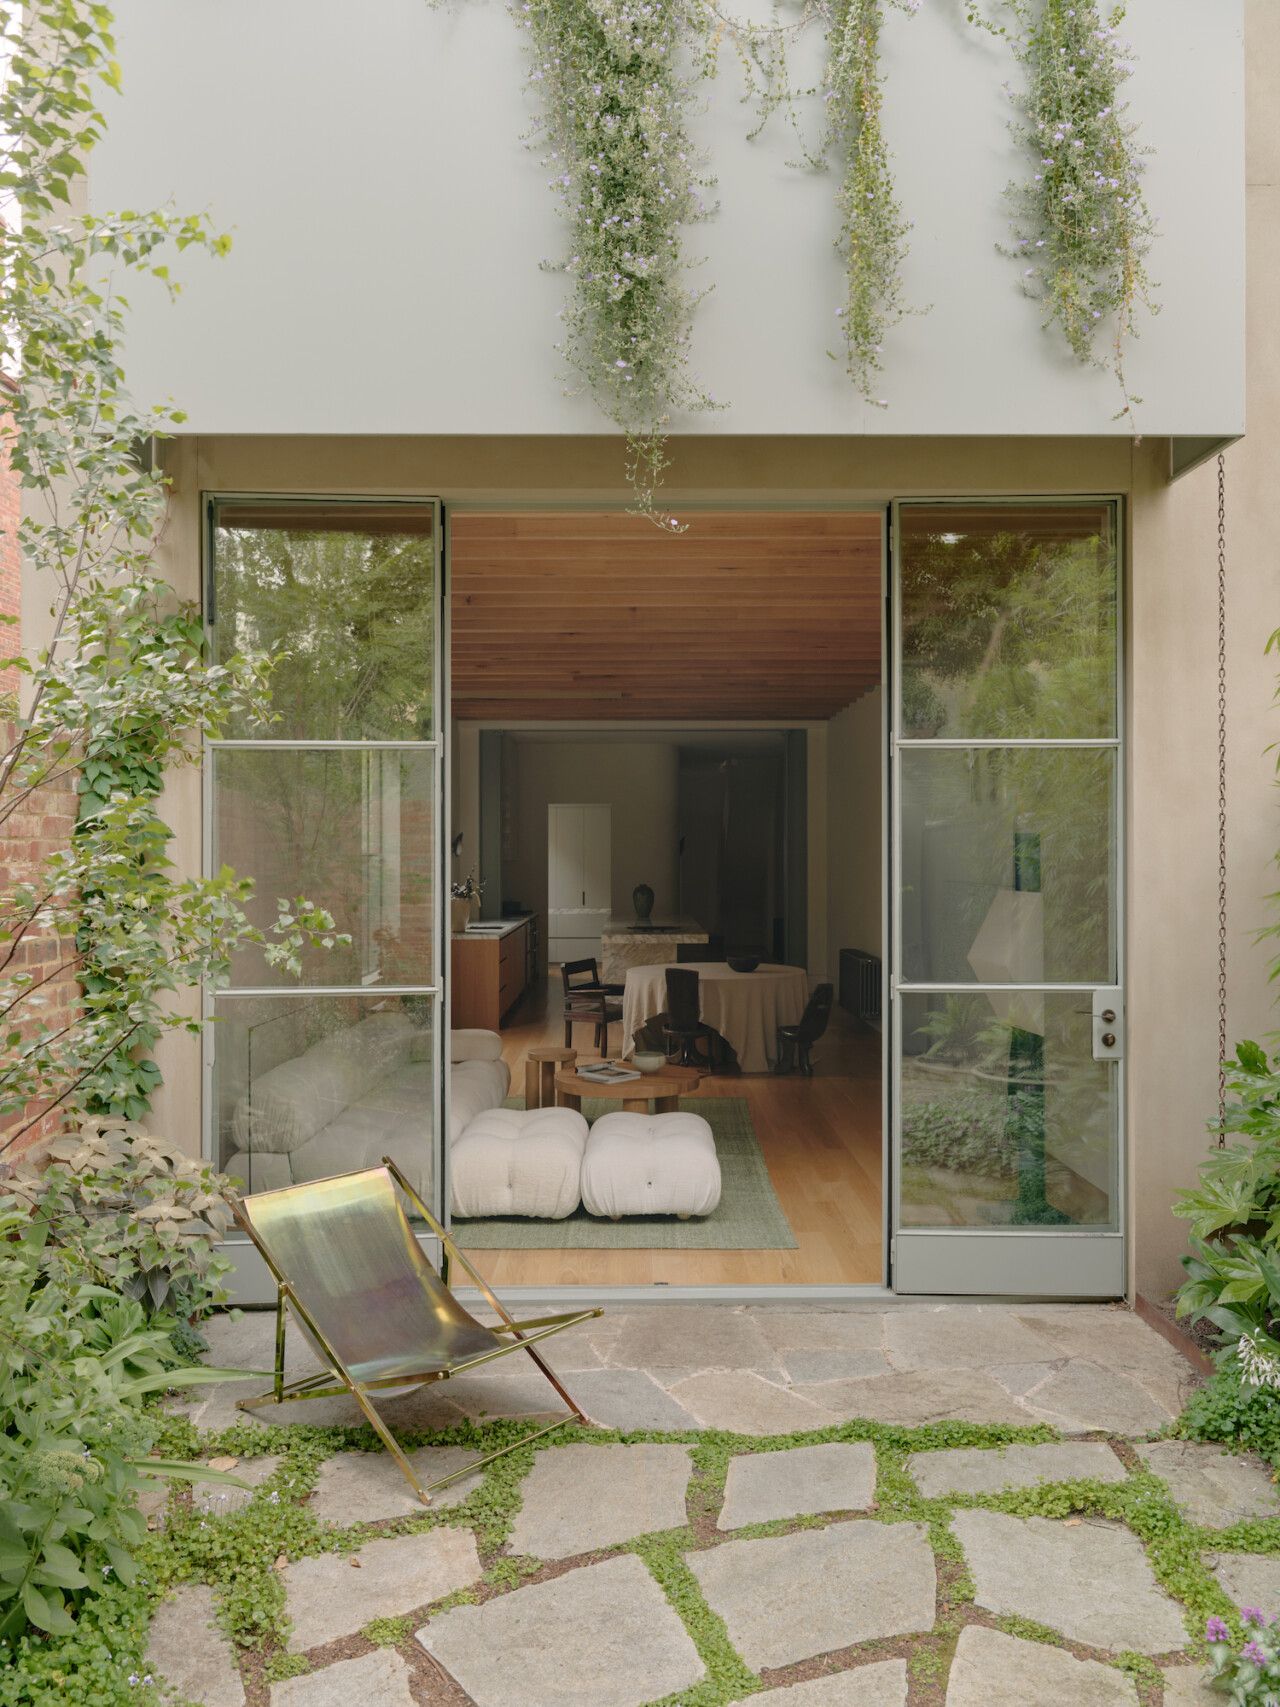 Simplicity and Elegance: The Beauty of Minimalist Garden Design